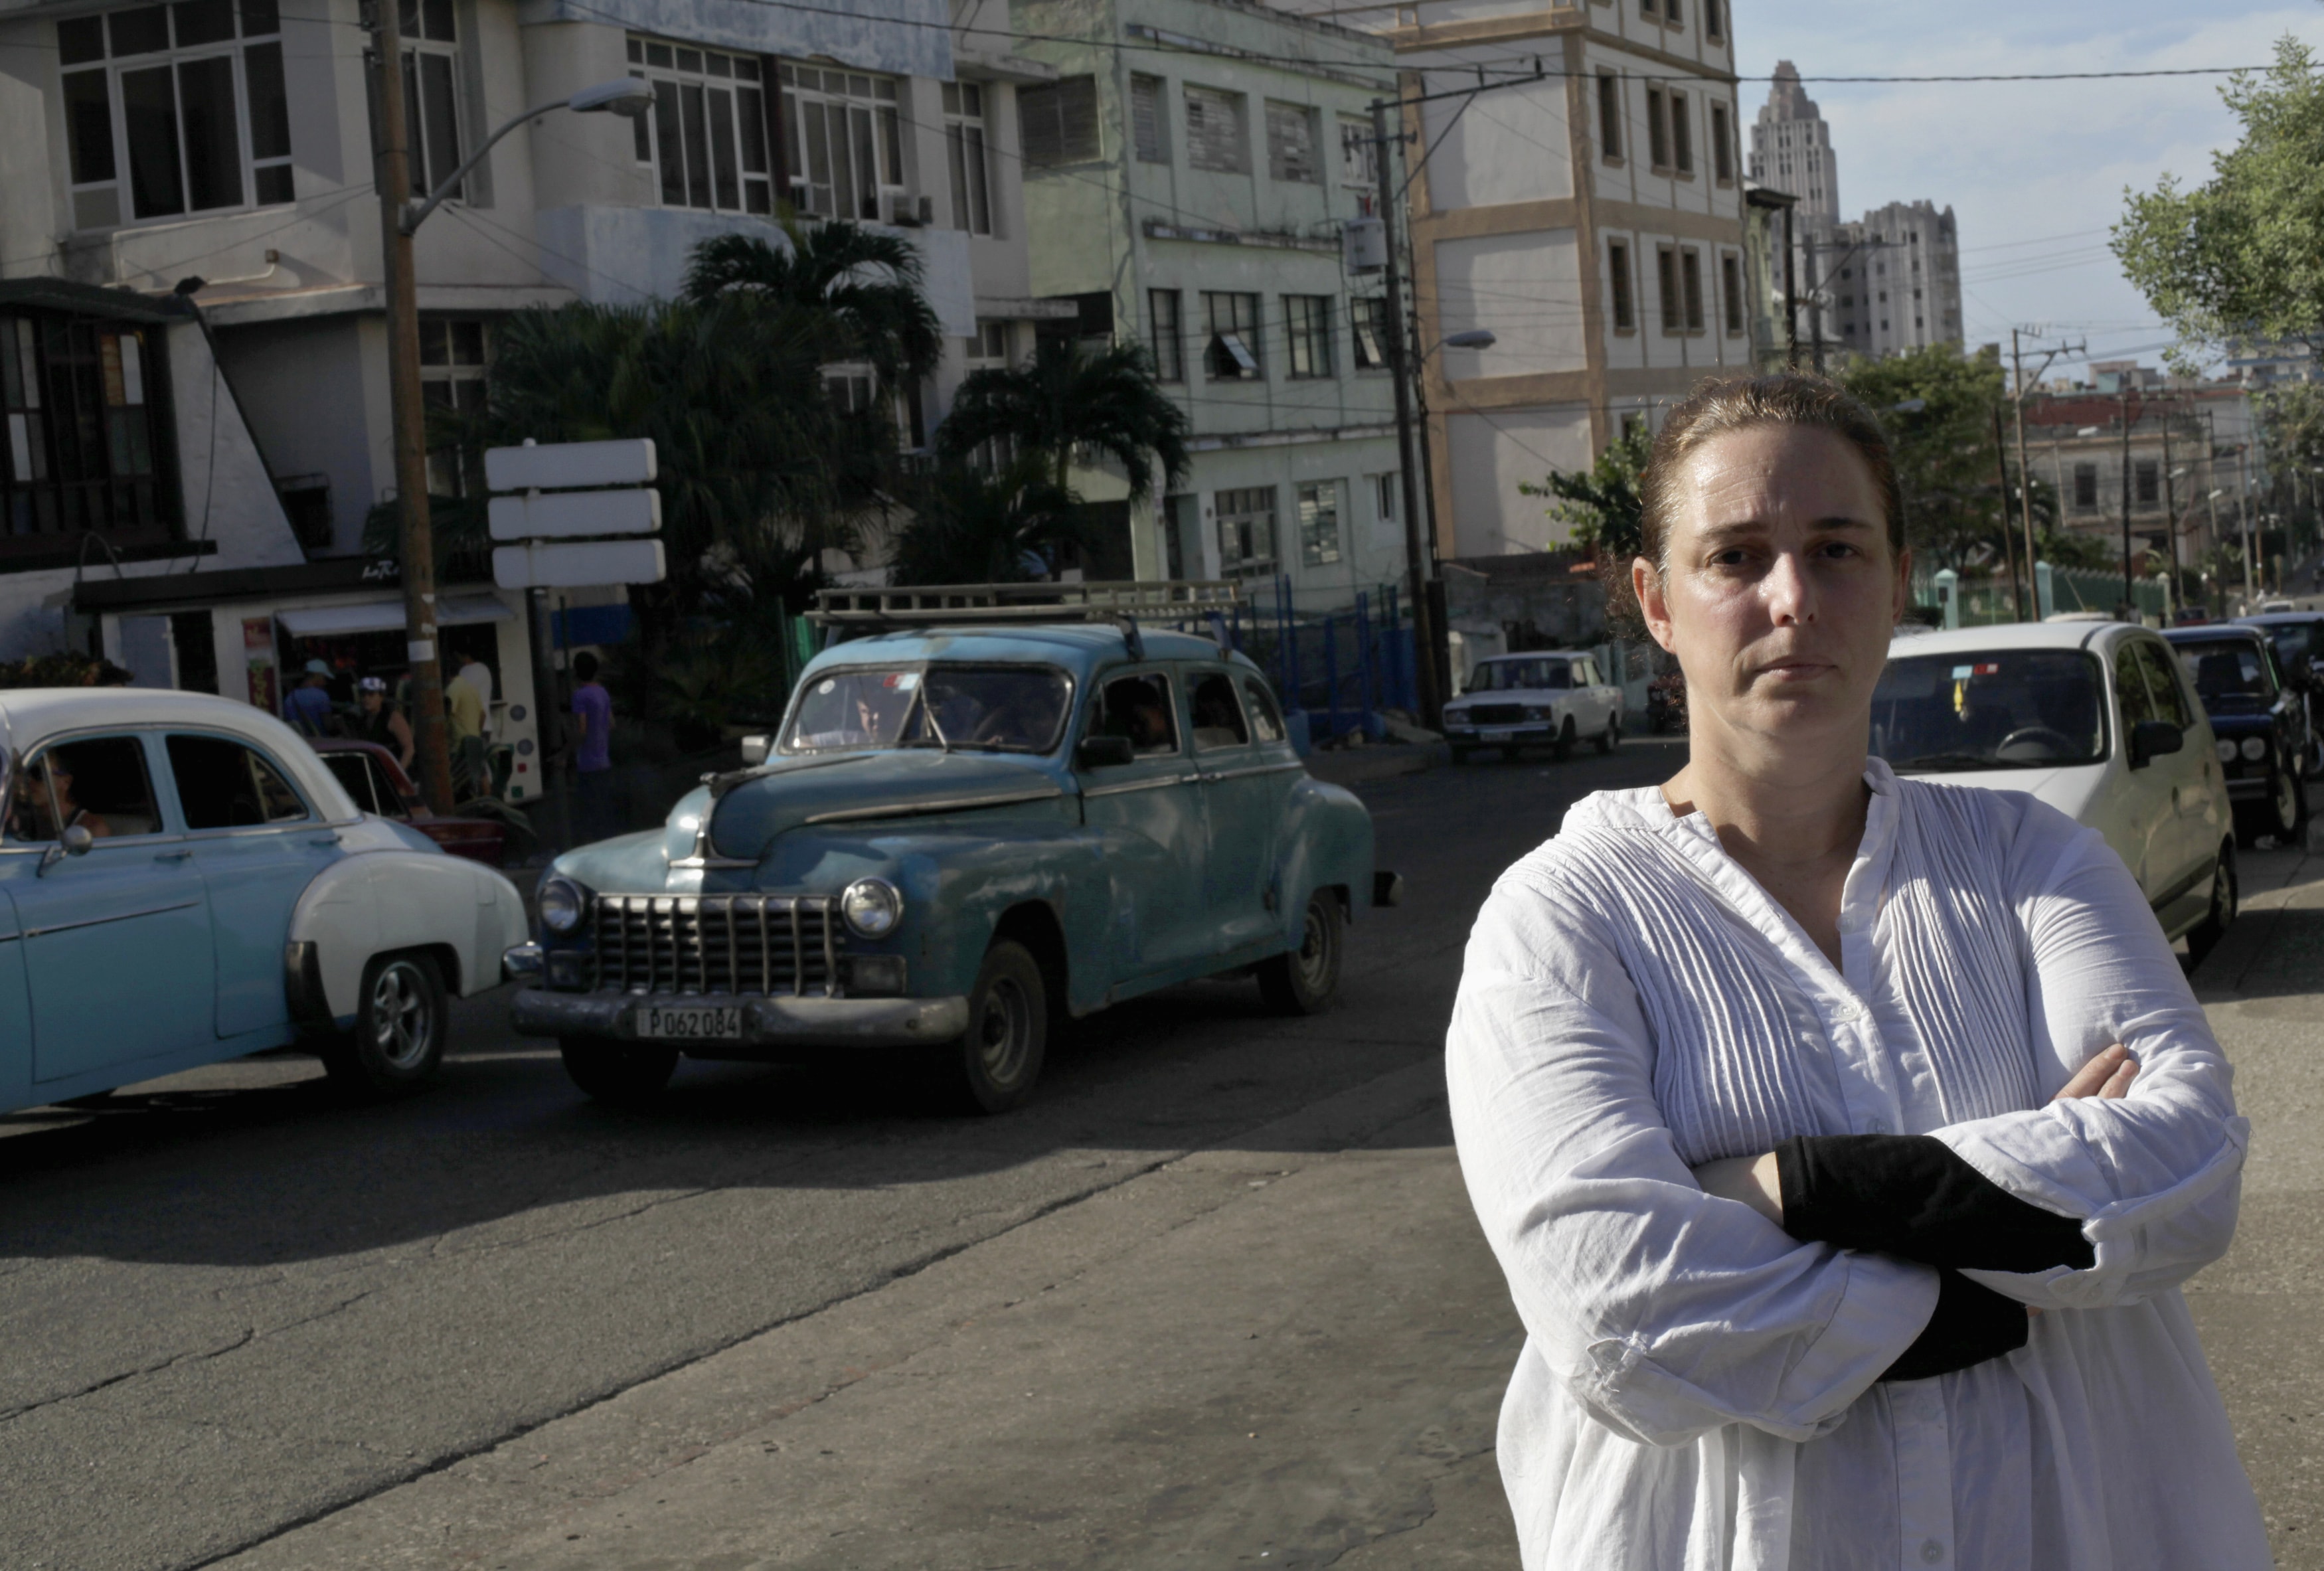 Cuban artist Tania Bruguera in Havana on 31 December 2014. She was held overnight after organising an unauthorized open microphone demonstration, REUTERS/Enrique De La Osa